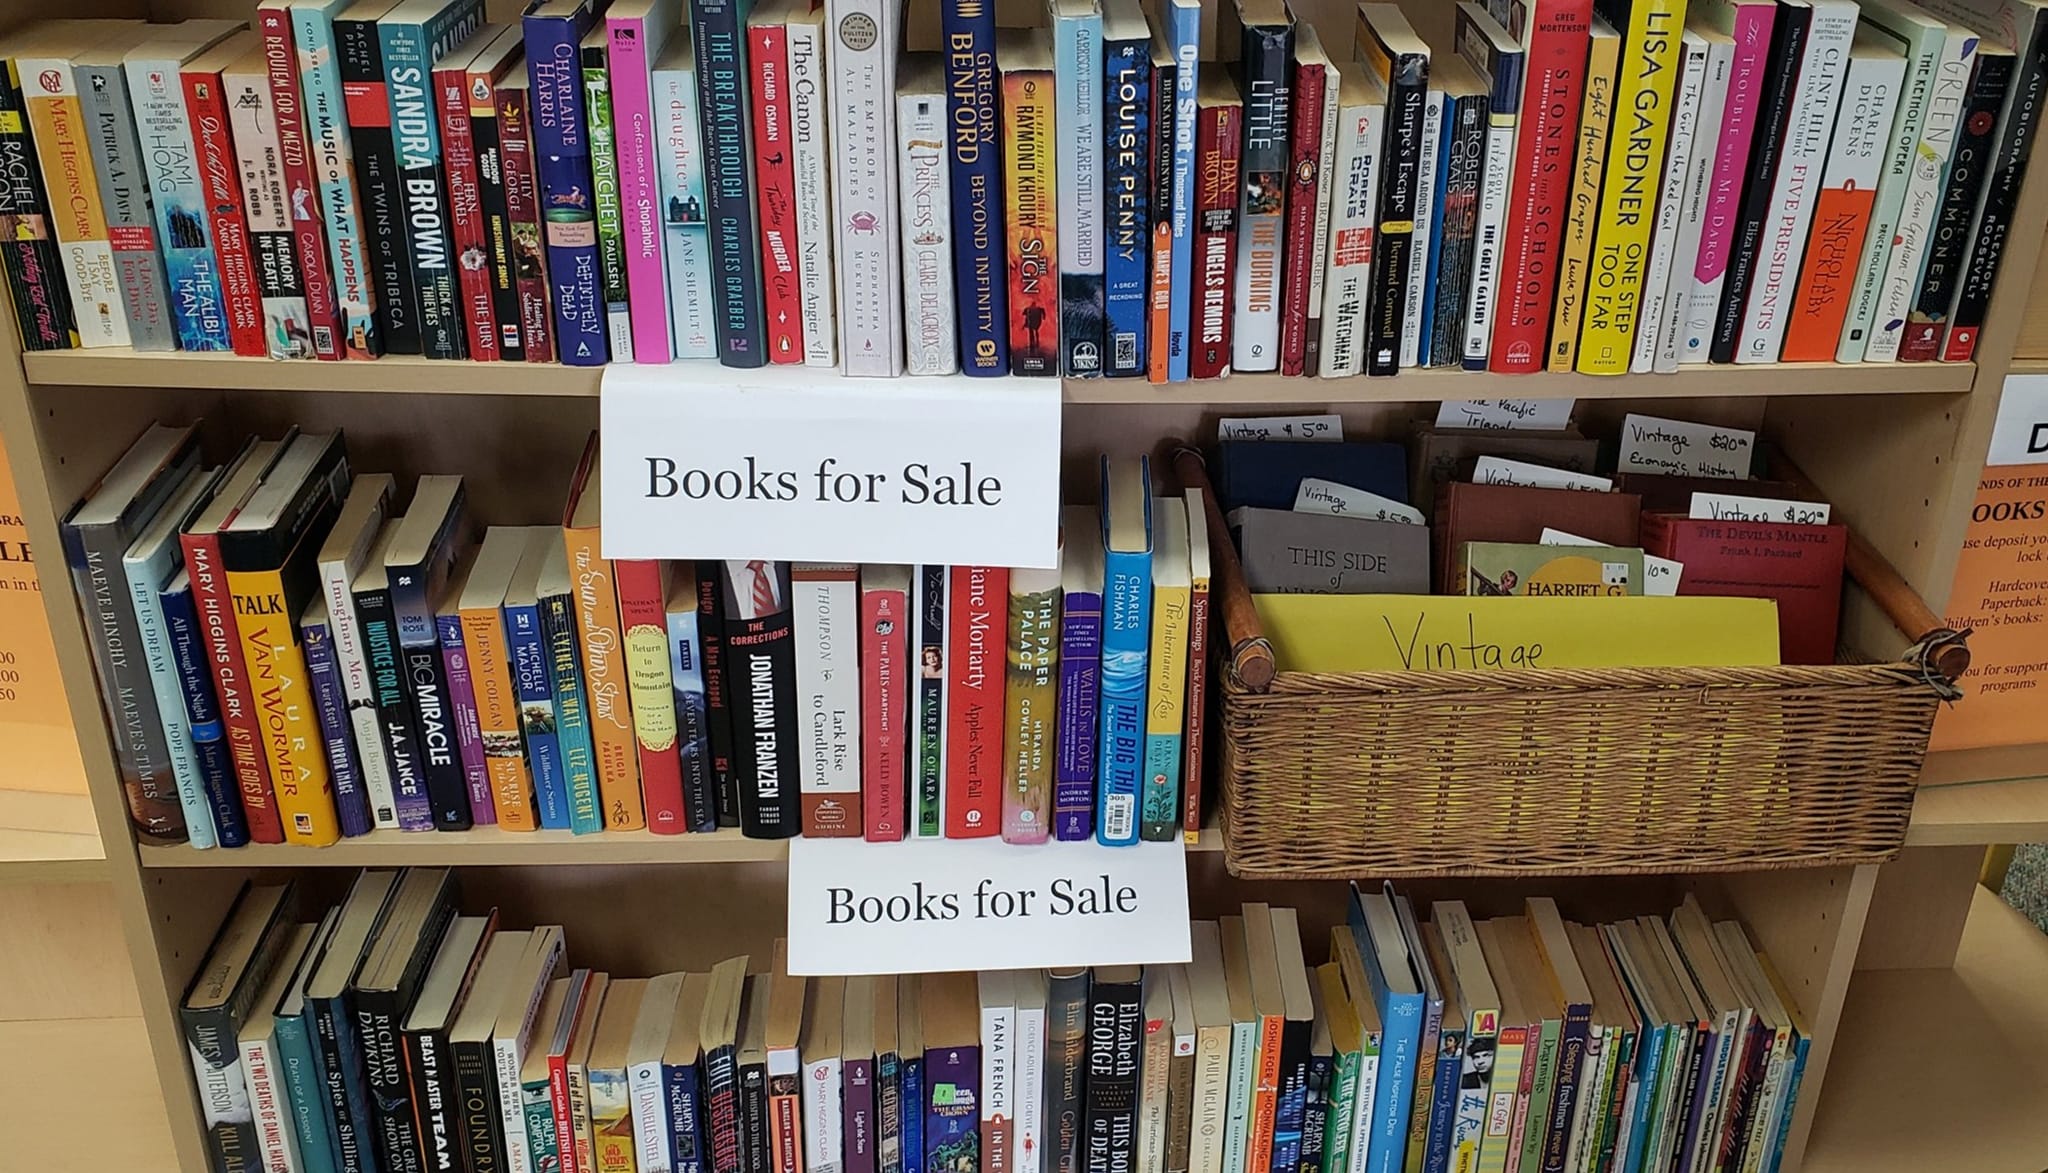 Picture of shelves full of books for sale at the library.